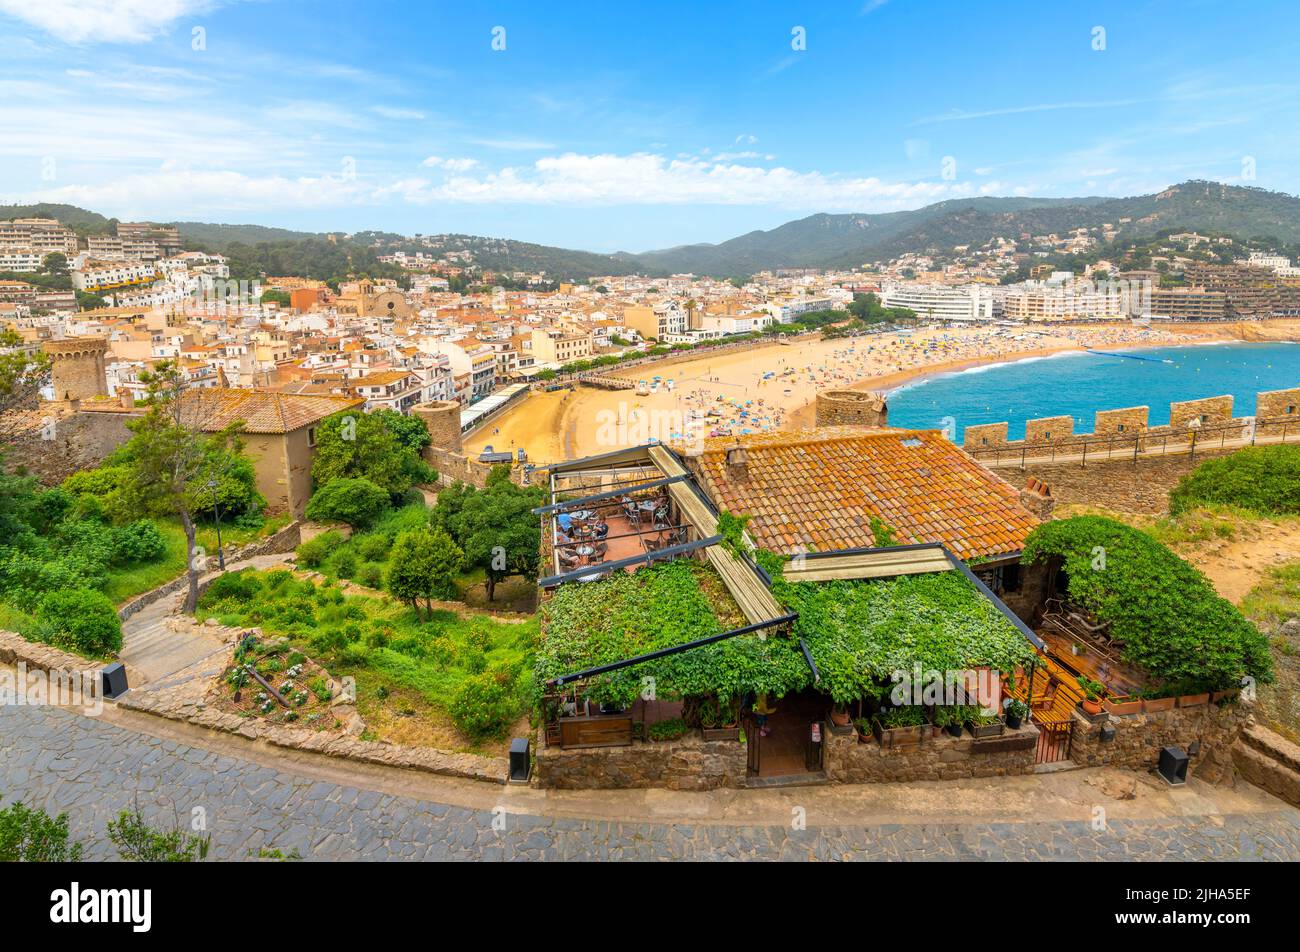 Views from the 12th century hilltop castle of the beach and old town of Tossa De Mar, Spain, along the Costa Brava coastline. Stock Photo